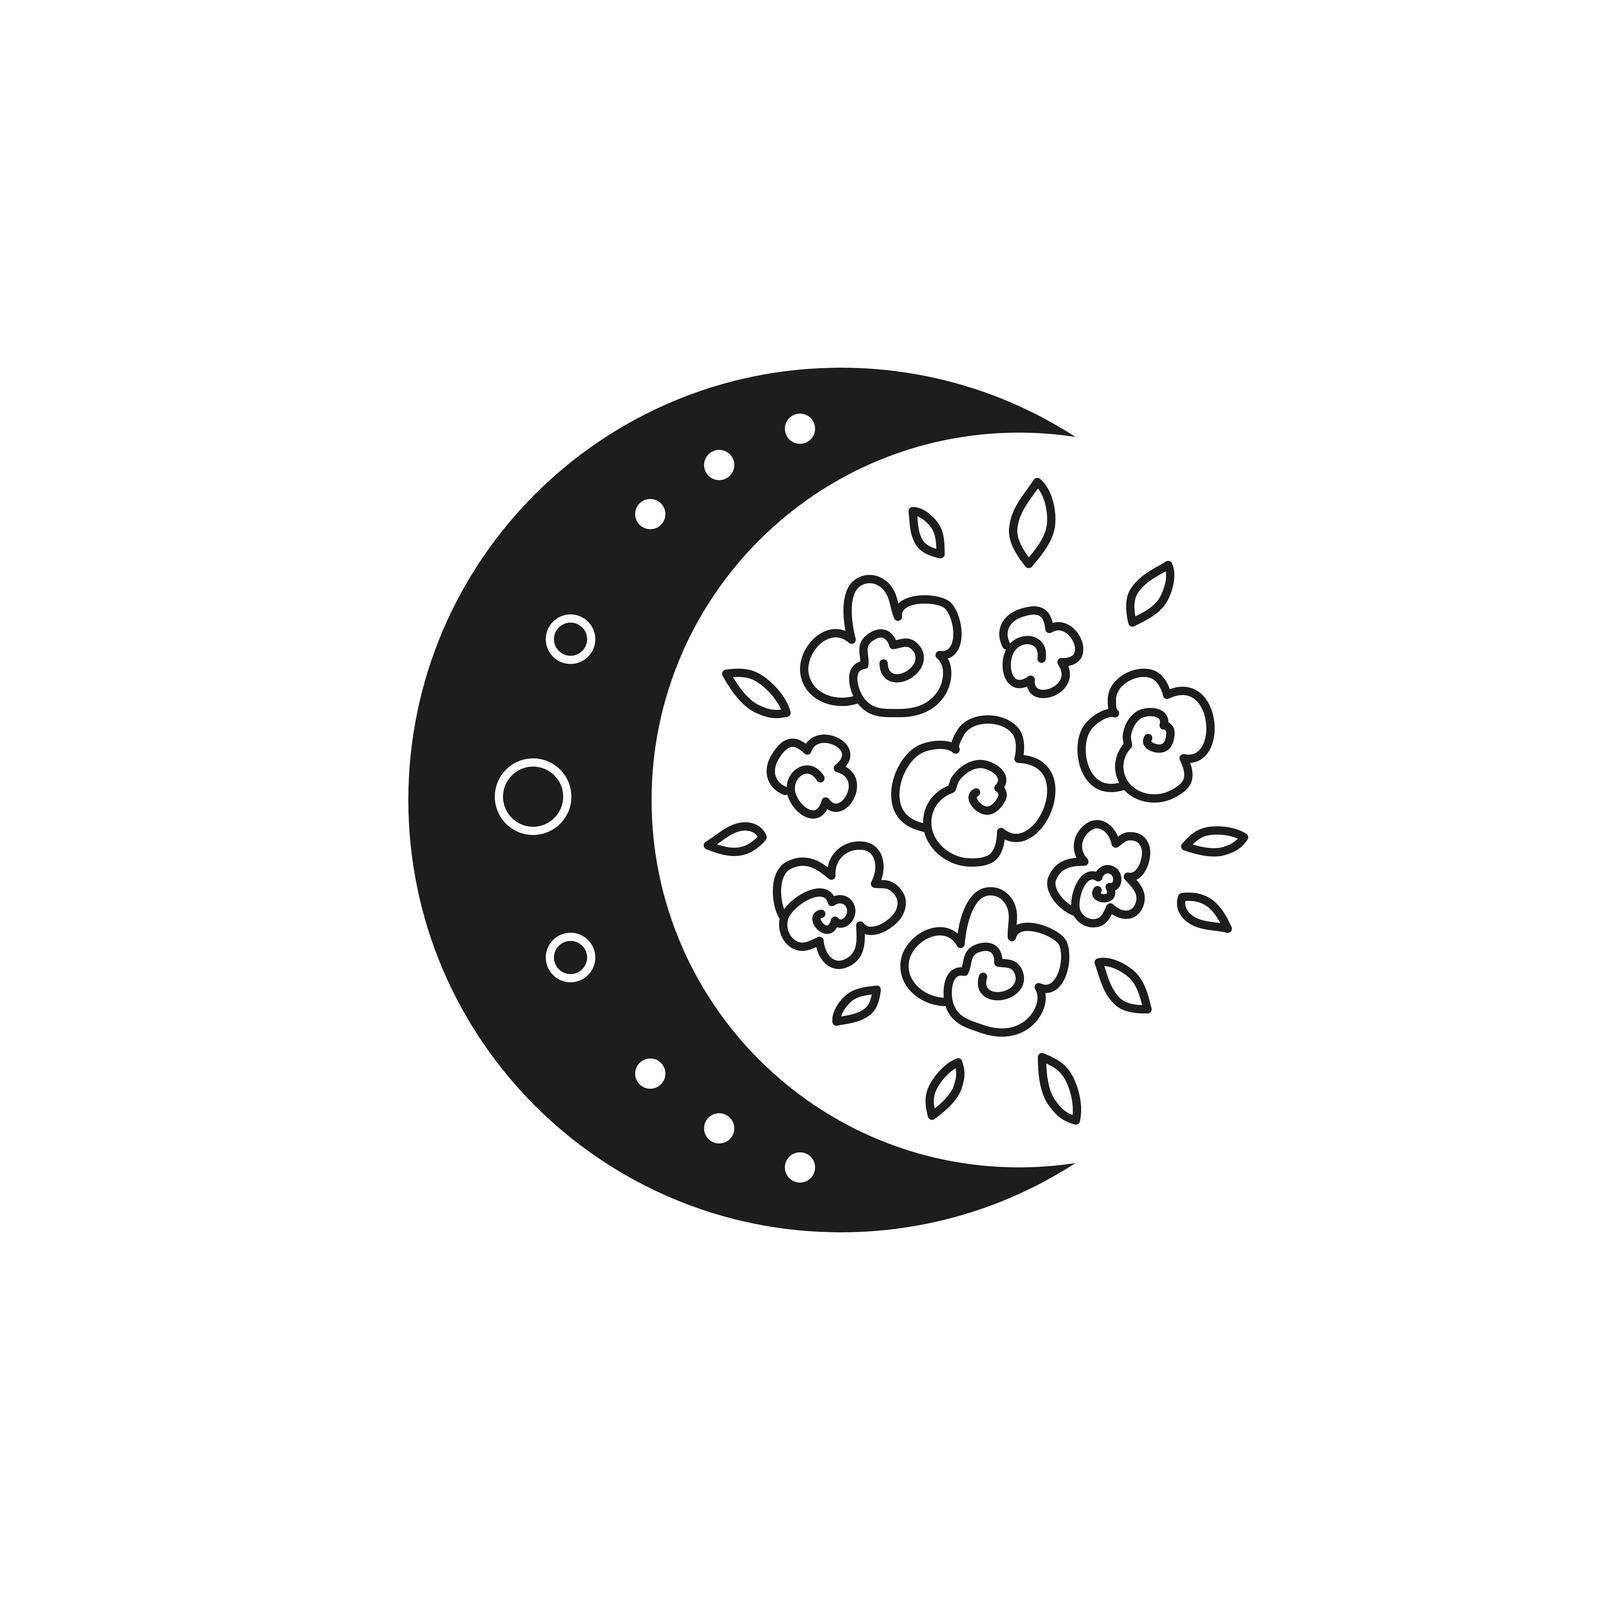 Bohemian crescent moon with outline flowers. by Minur